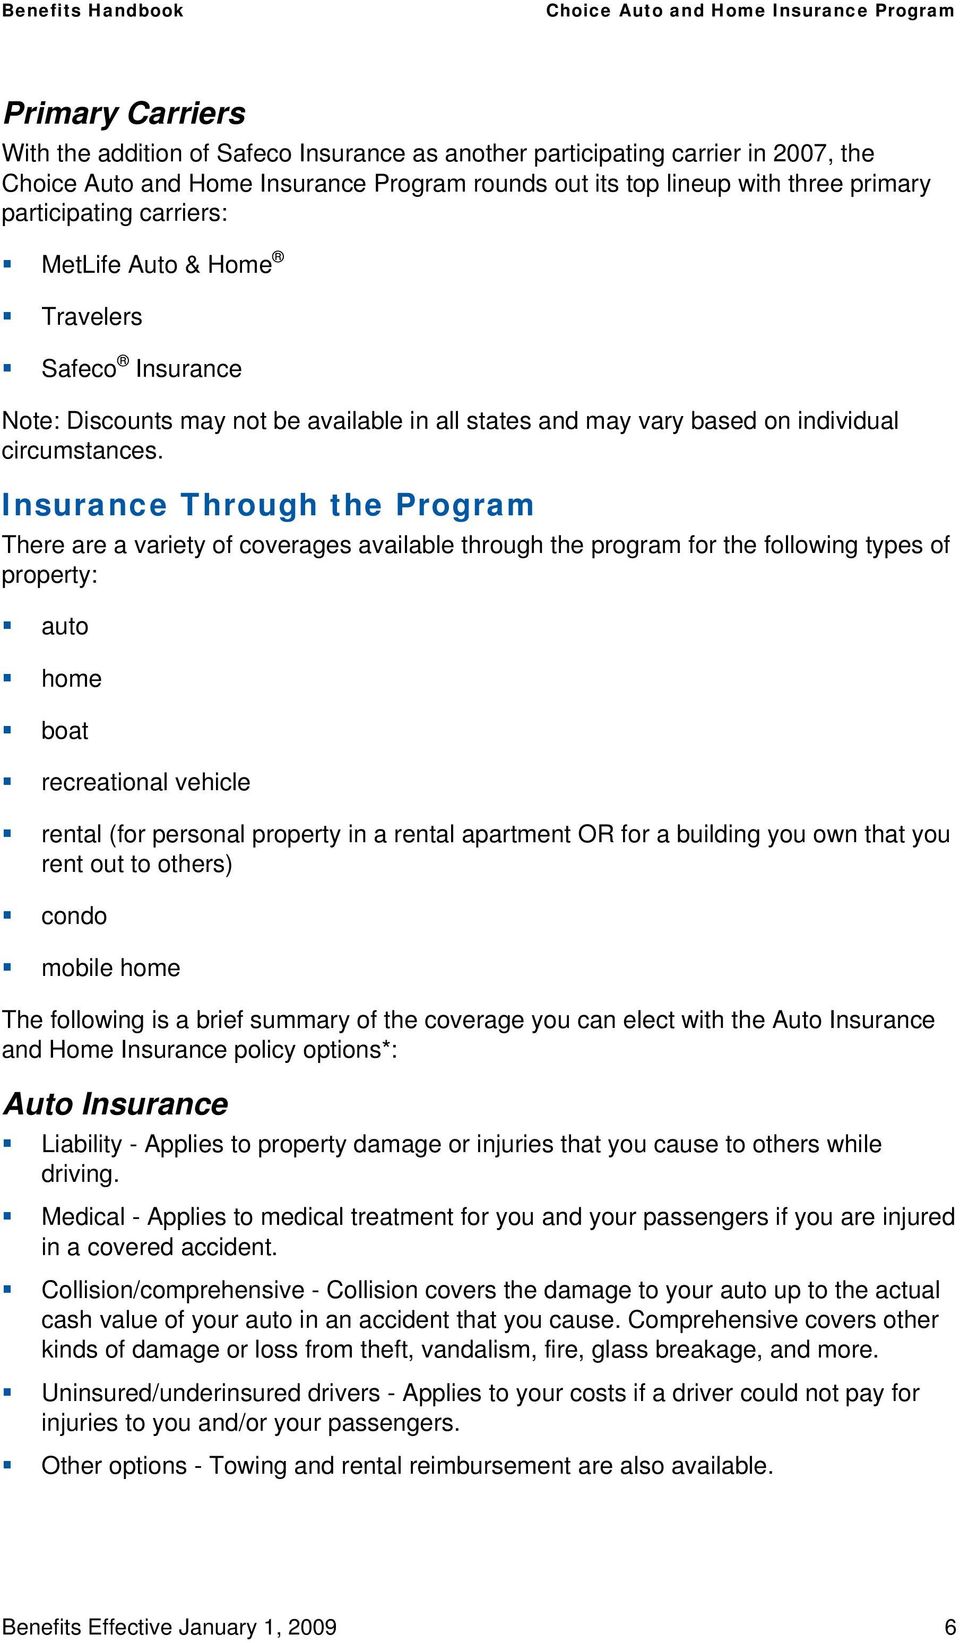 Insurance Through the Program There are a variety of coverages available through the program for the following types of property: auto home boat recreational vehicle rental (for personal property in